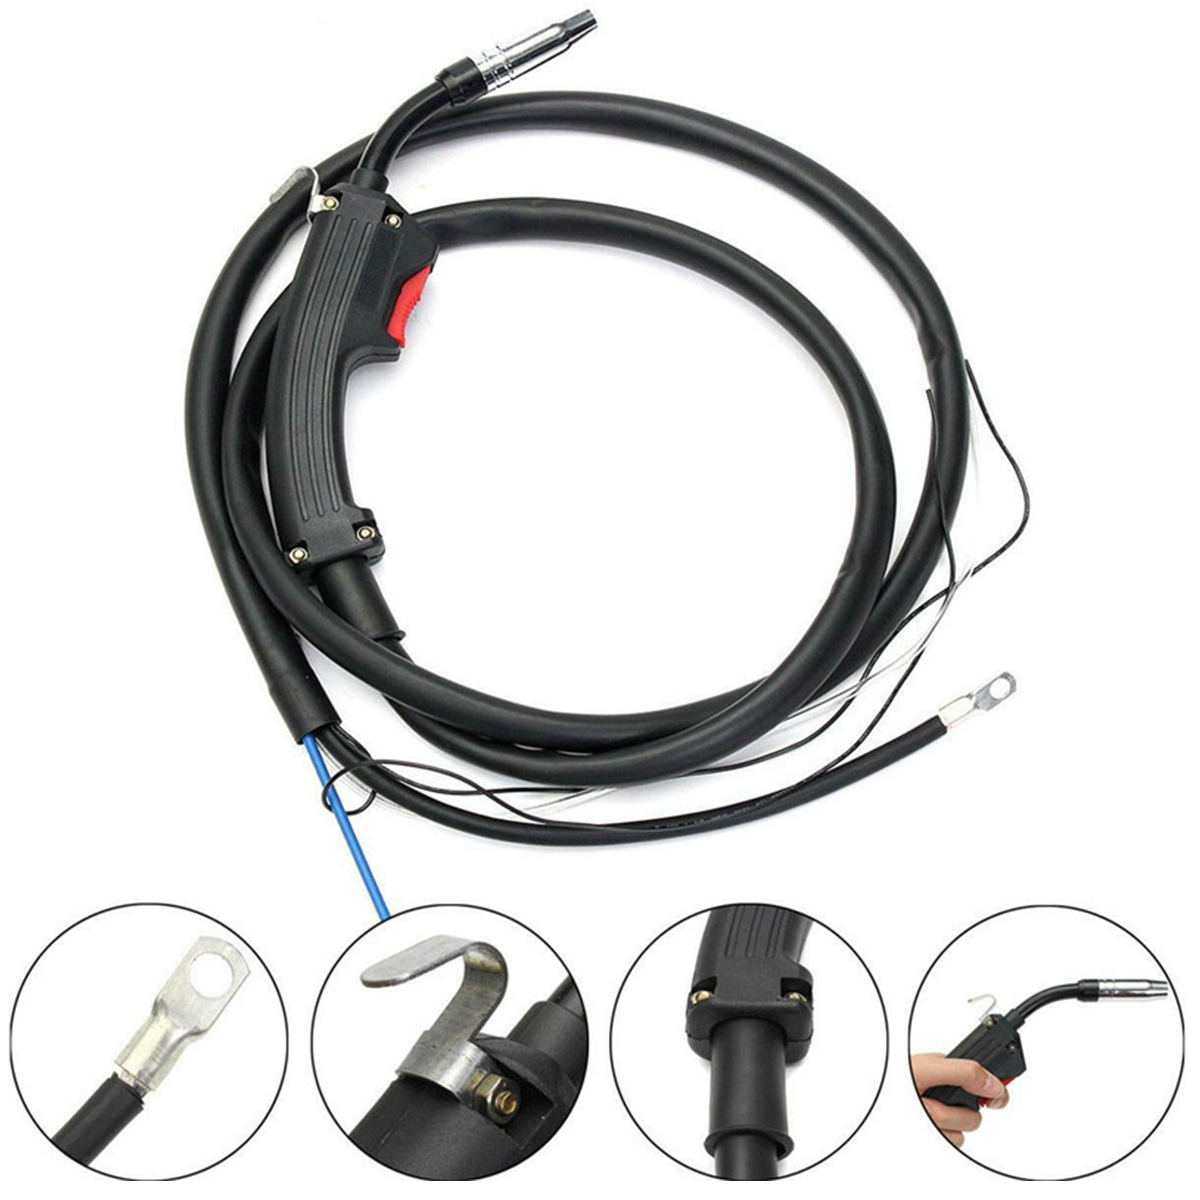 Practical-Gas-Welding-Torch-Air-Cooled-Welding-Torch-Replacement-For-MIG-MAG-Welding-Machine-1762073-3